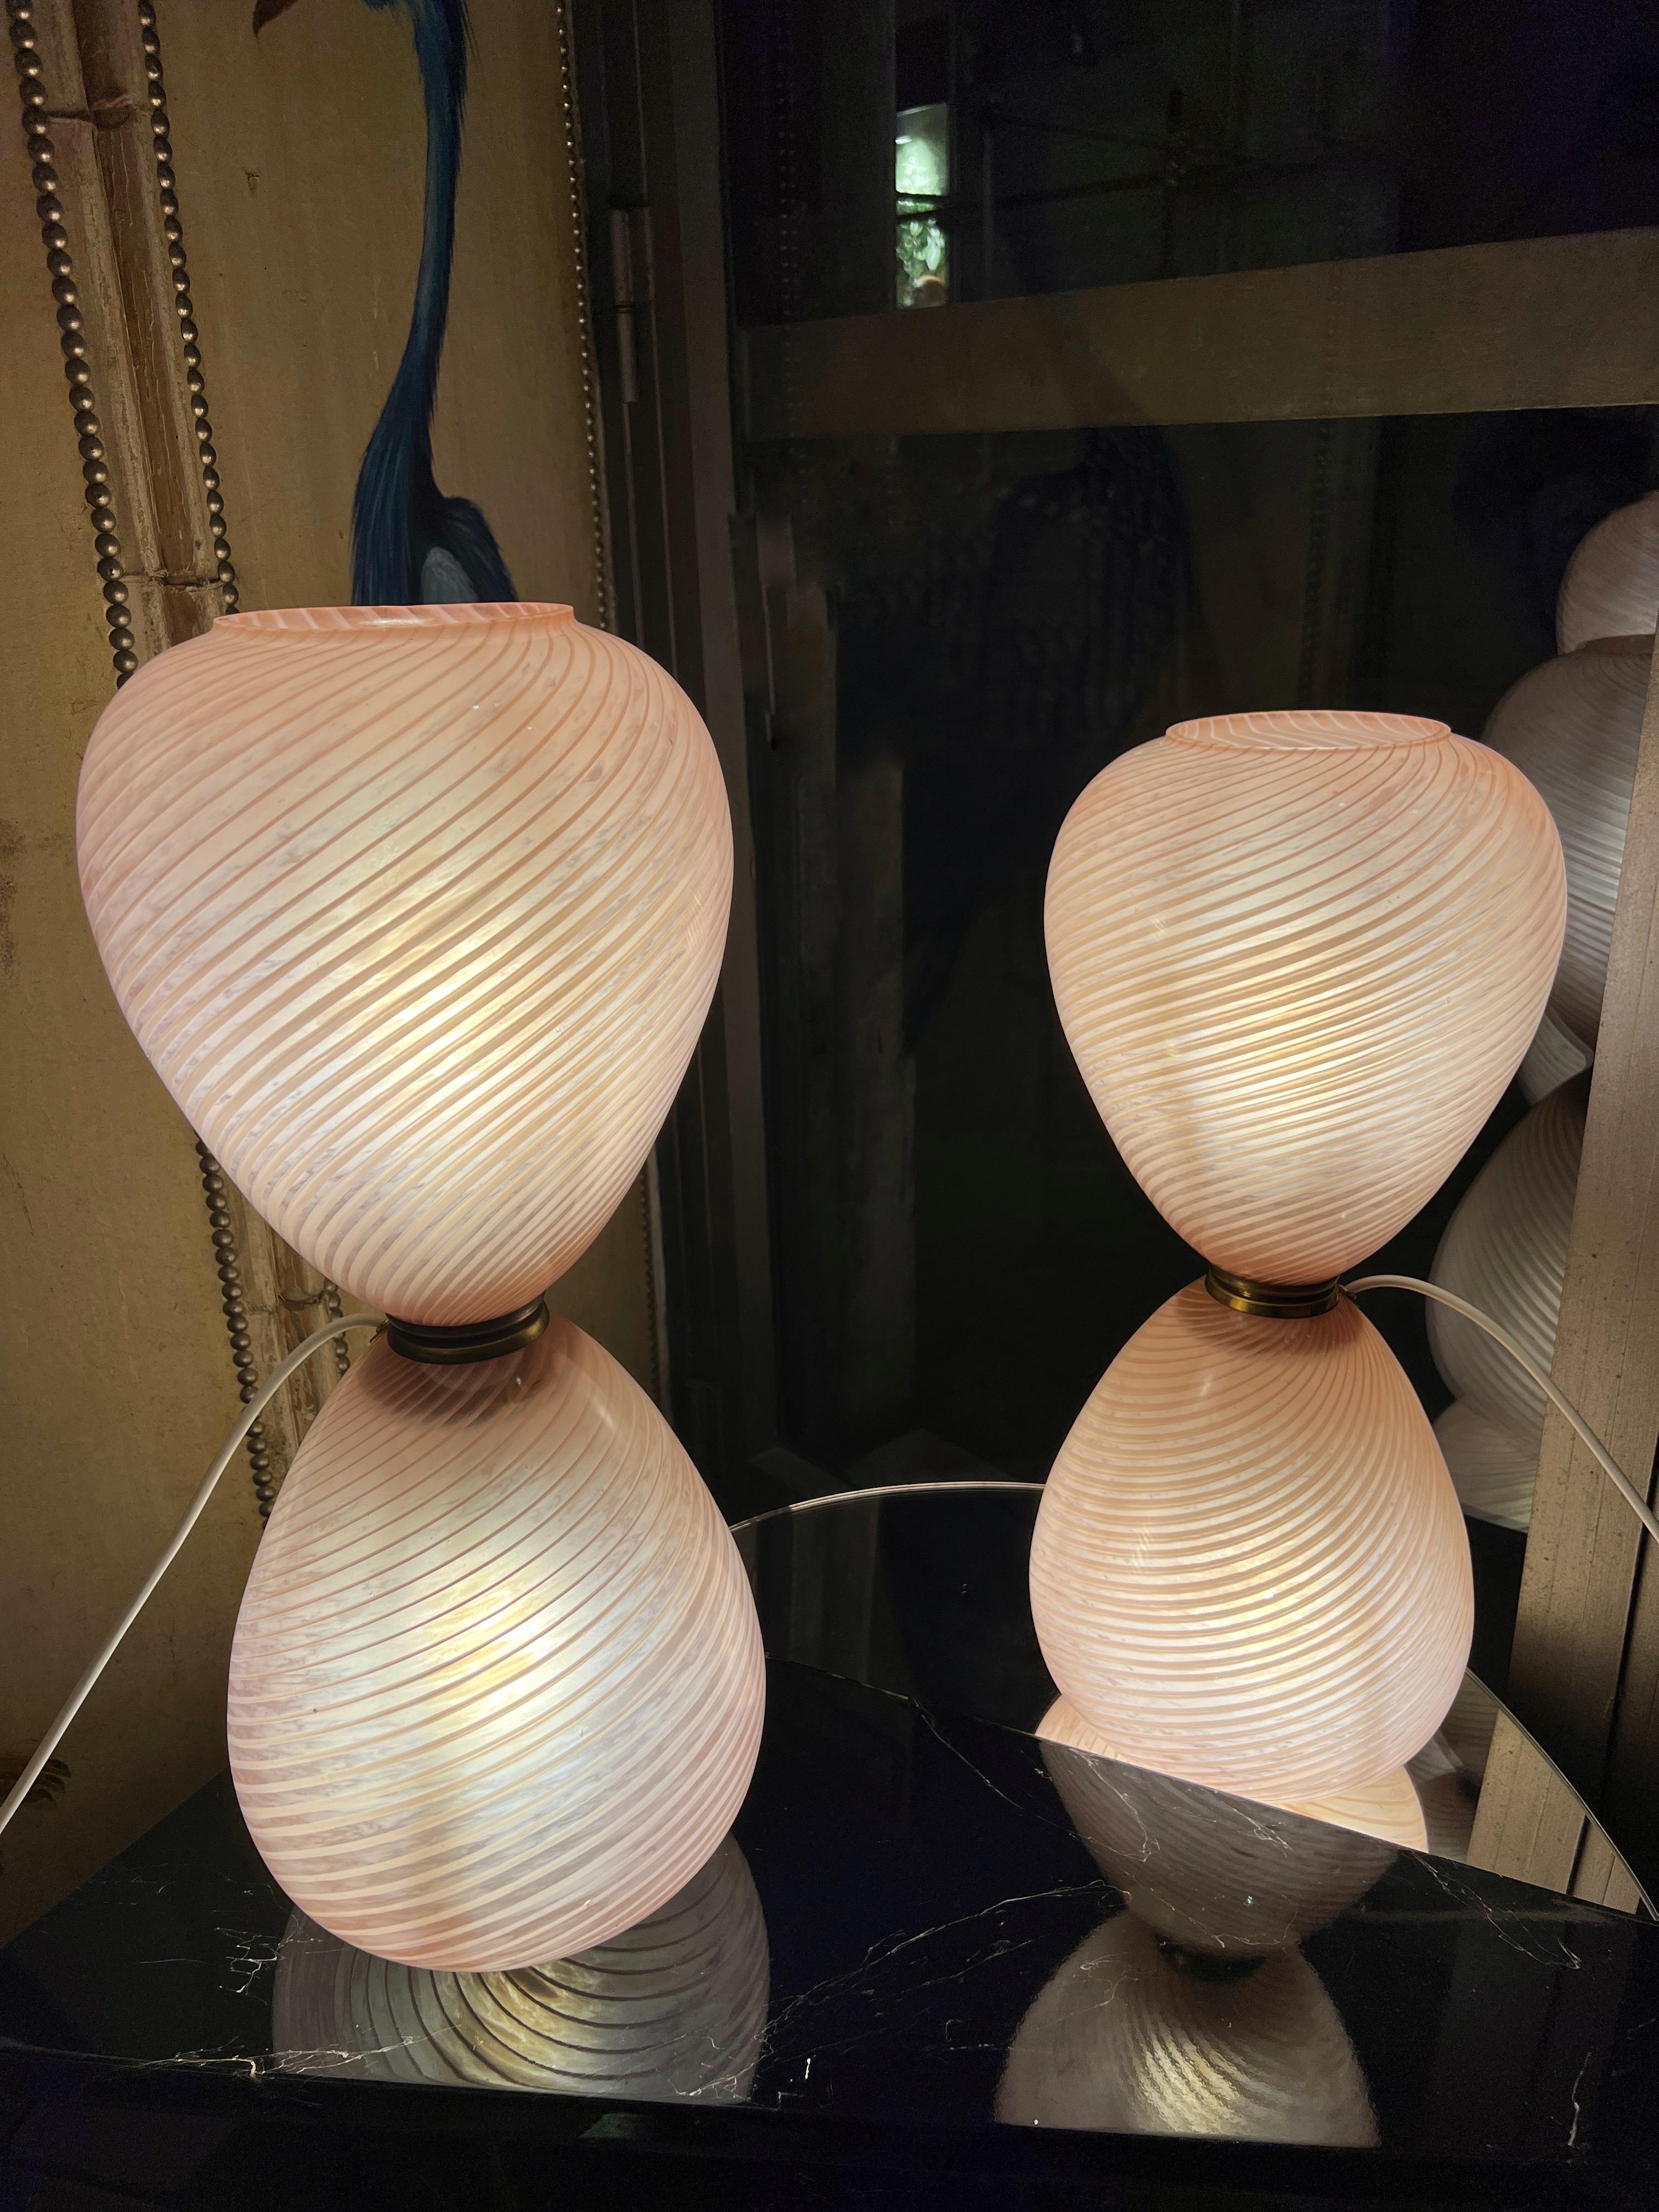 Pair of Pink Pale Blown Glass Murano Hourglass Table Lamps, 1950s For Sale 6